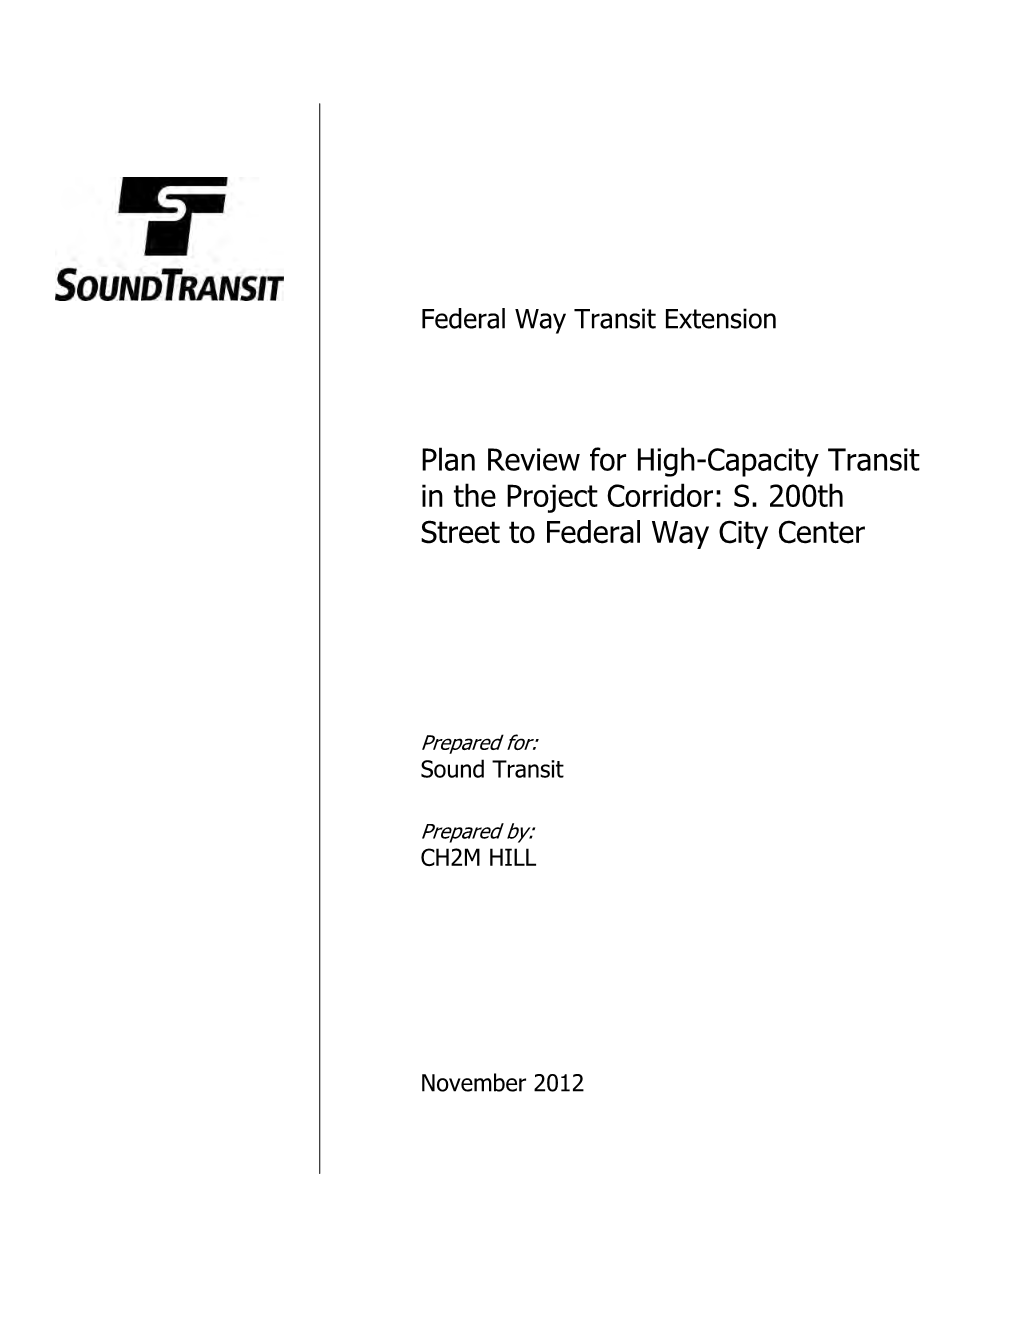 Plan Review for High-Capacity Transit in the Project Corridor: S